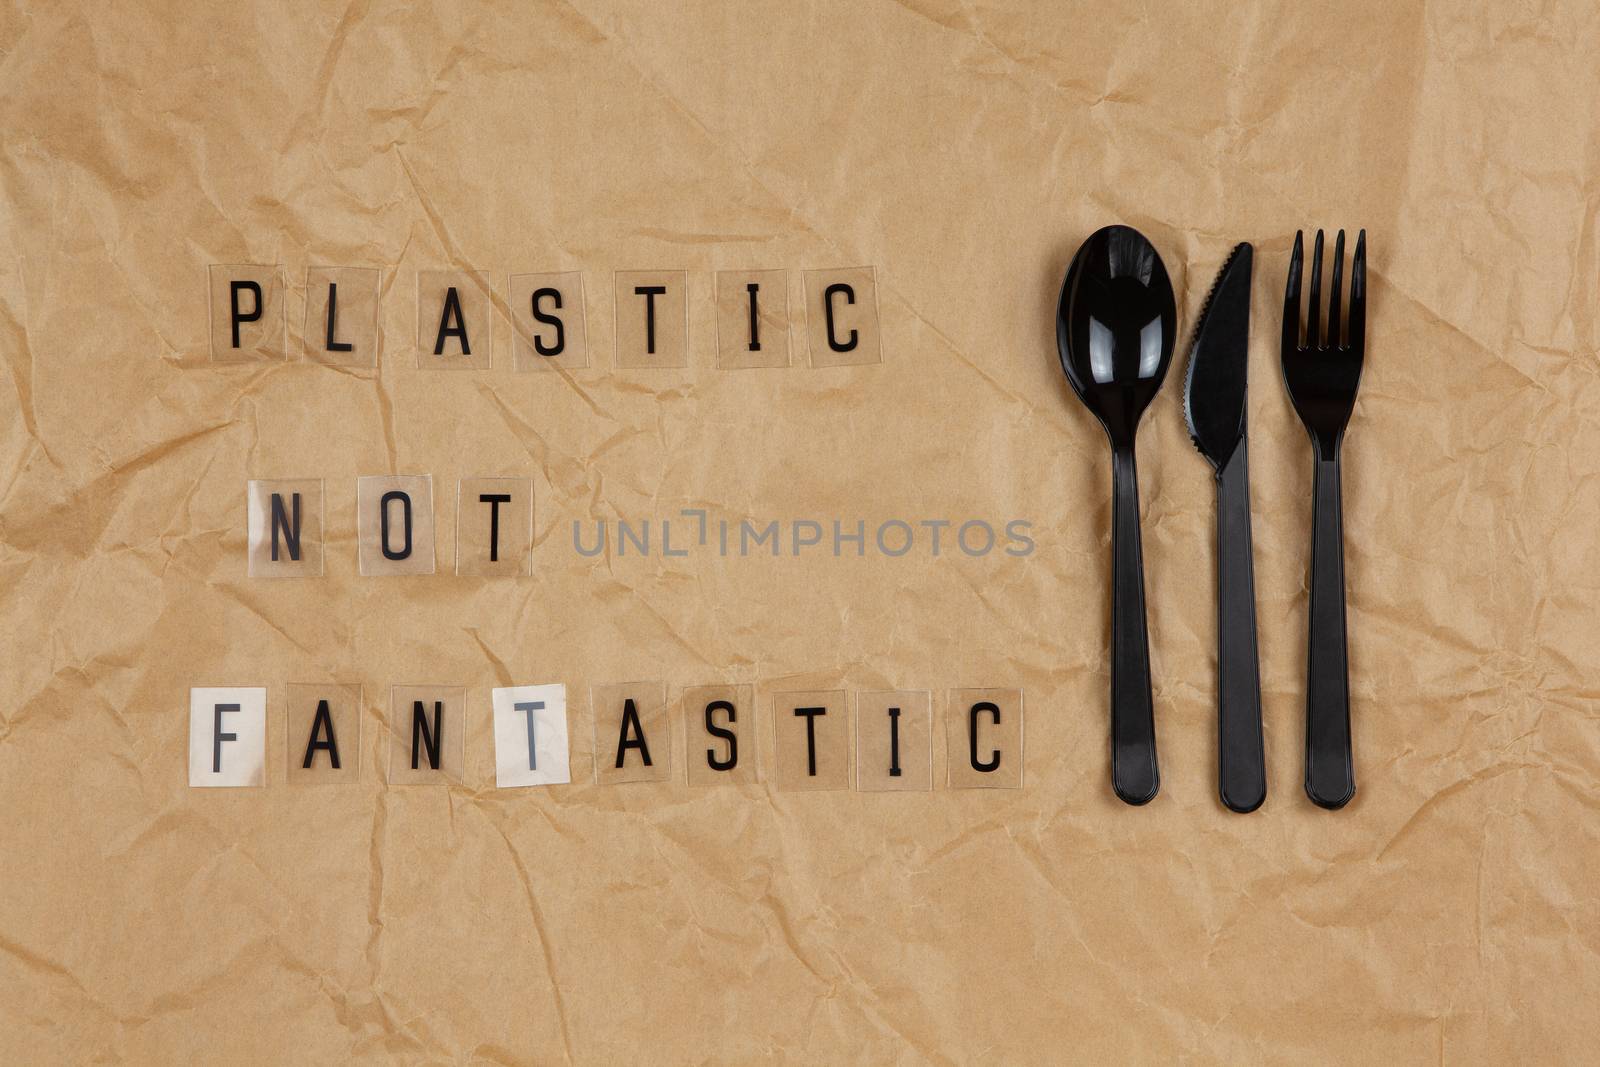 Disposable black appliances fork, spoon, knife, phrase from letters on transparent base Plastic not fantastic on brown crumpled craft paper. Eco, zero waste concept. Flat lay, top view. Horizontal.